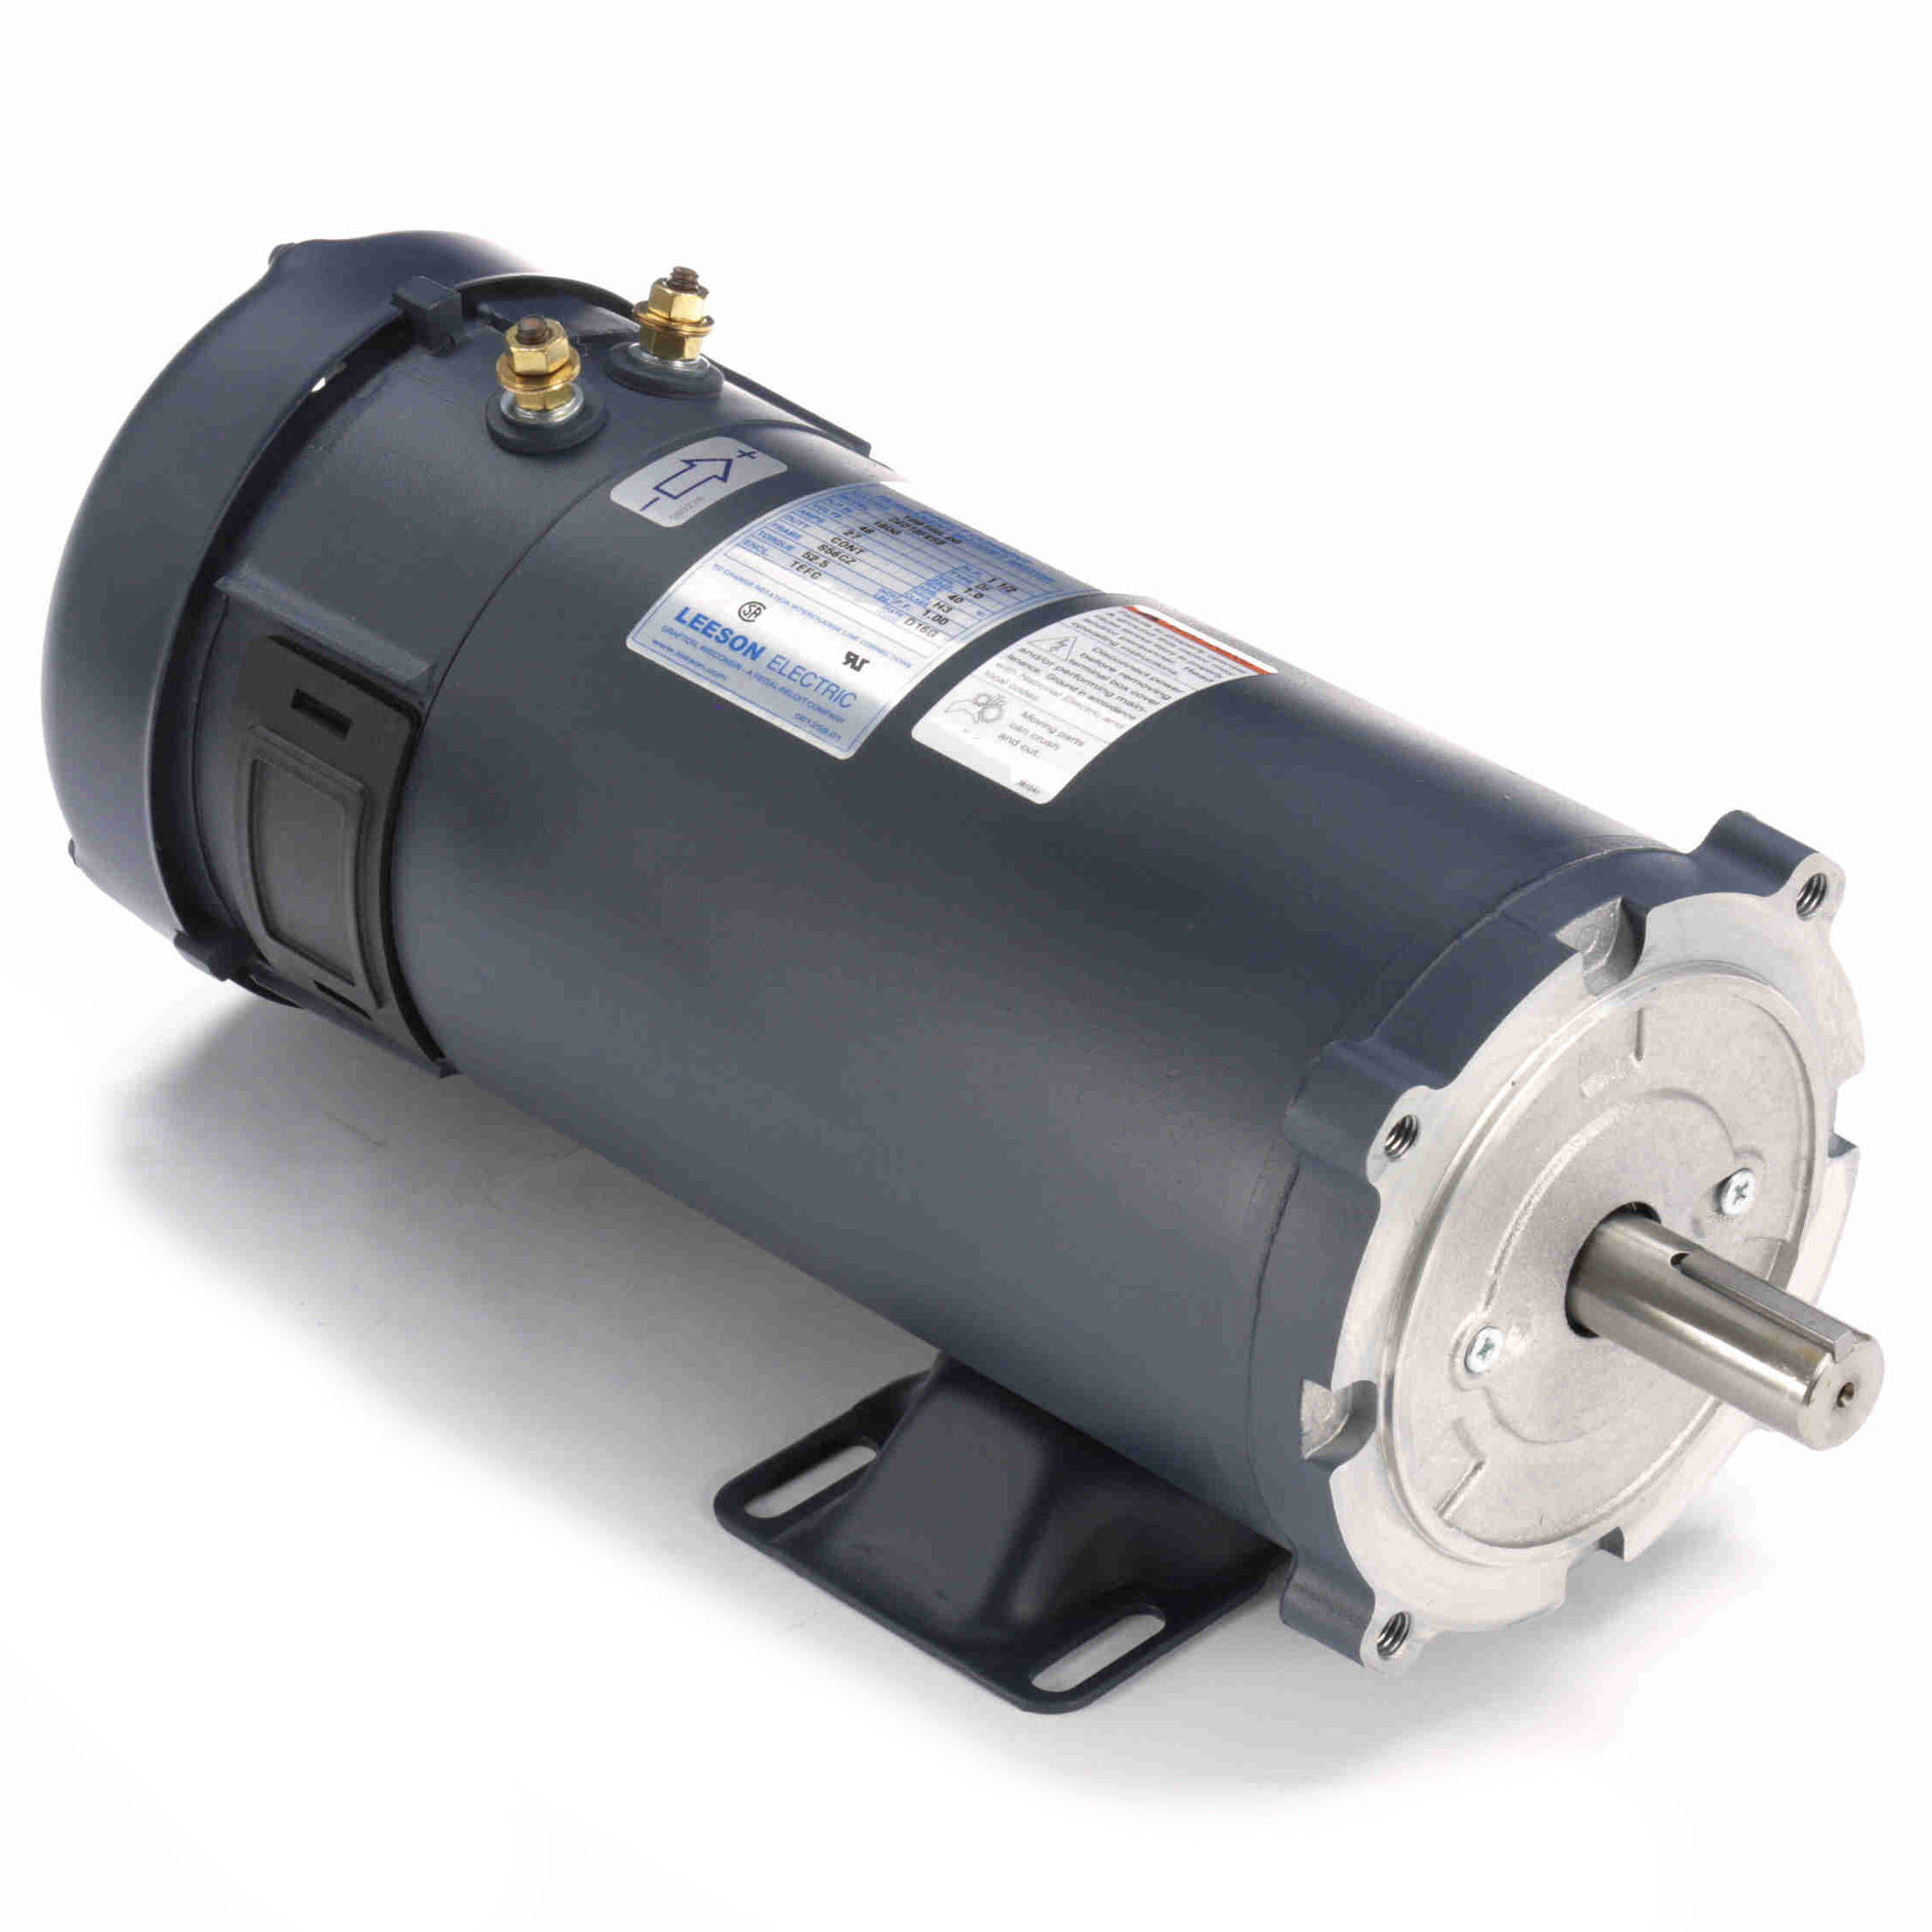 109105.00 Leeson 1.5HP Low Voltage DC Electric Motor, 1800RPM 1